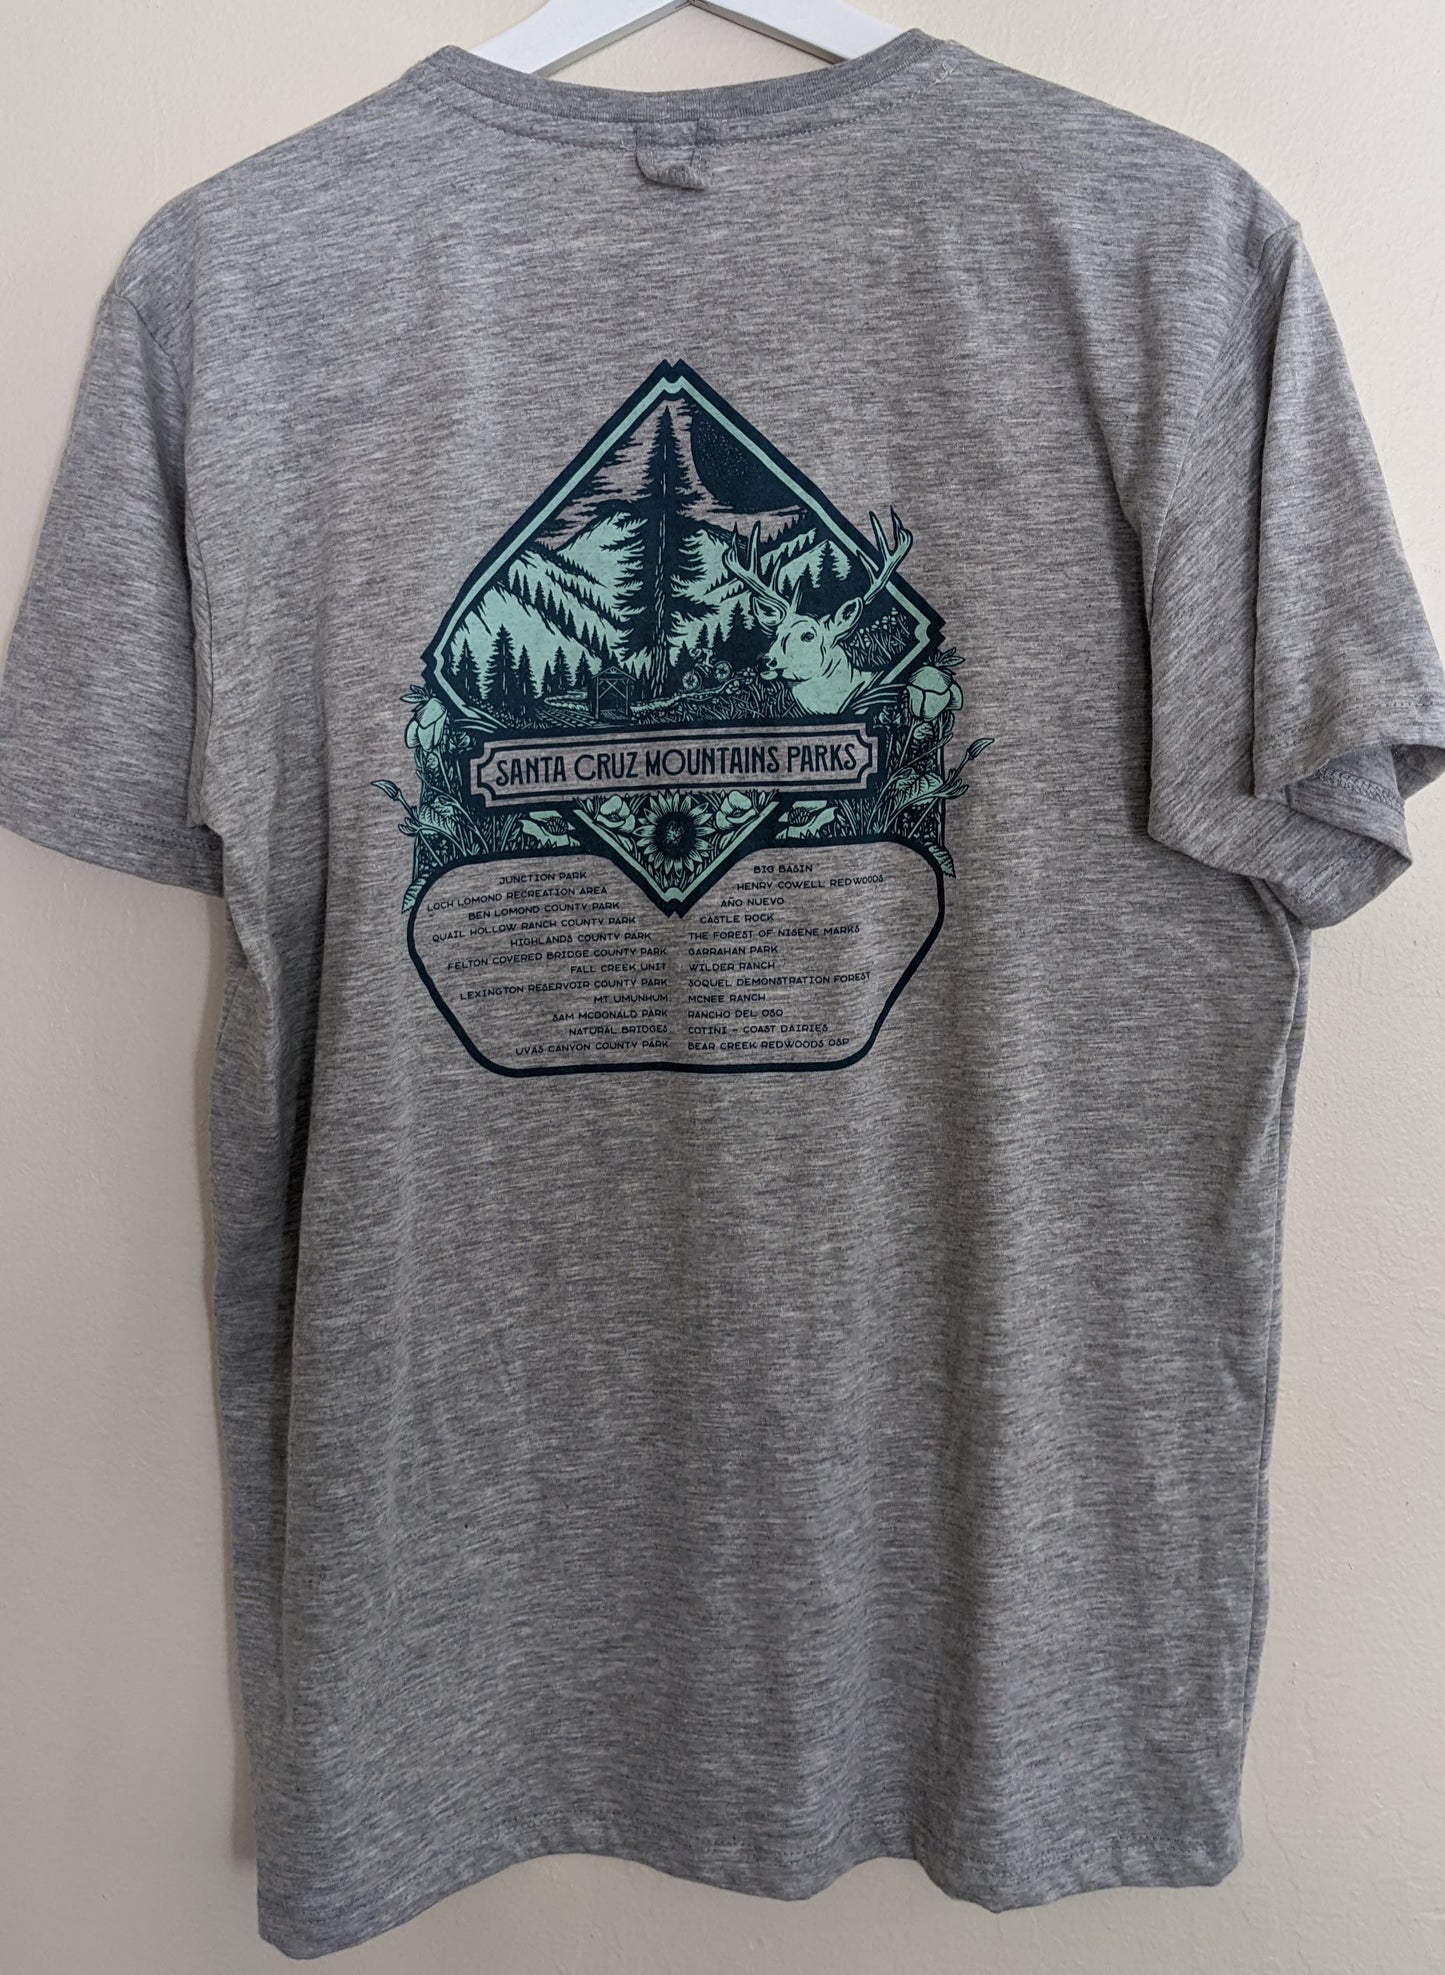 Gray Camp Collection shirt with Santa Cruz Mountains Parks design by Nicky Gatson,  created by Jackie from Present